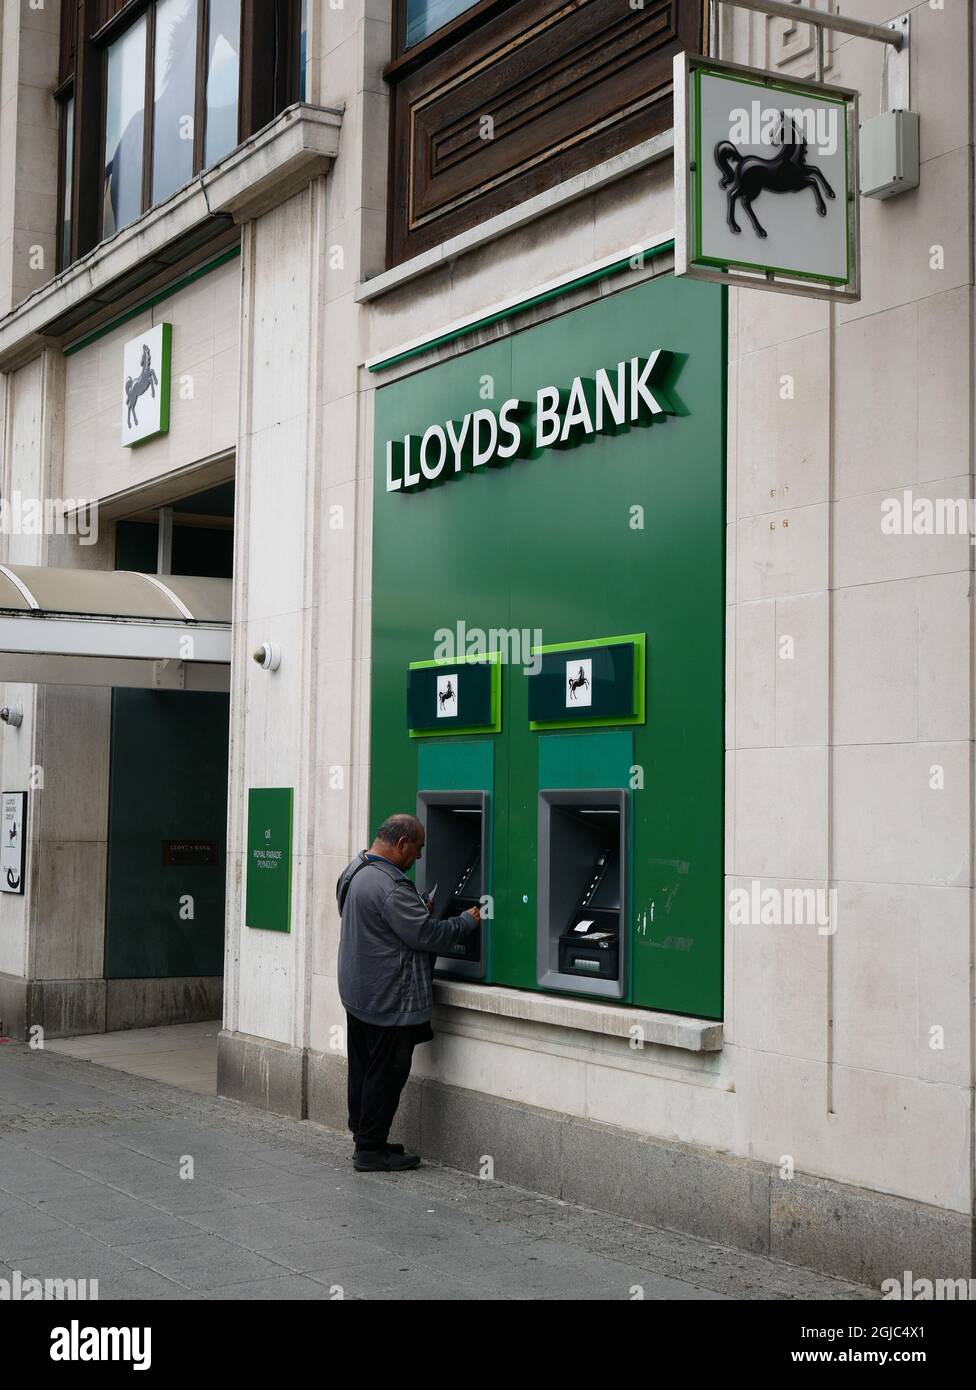 Lloyds bank high street branch with customer using exterior ATM facilities. Plymouth, UK. Stock Photo